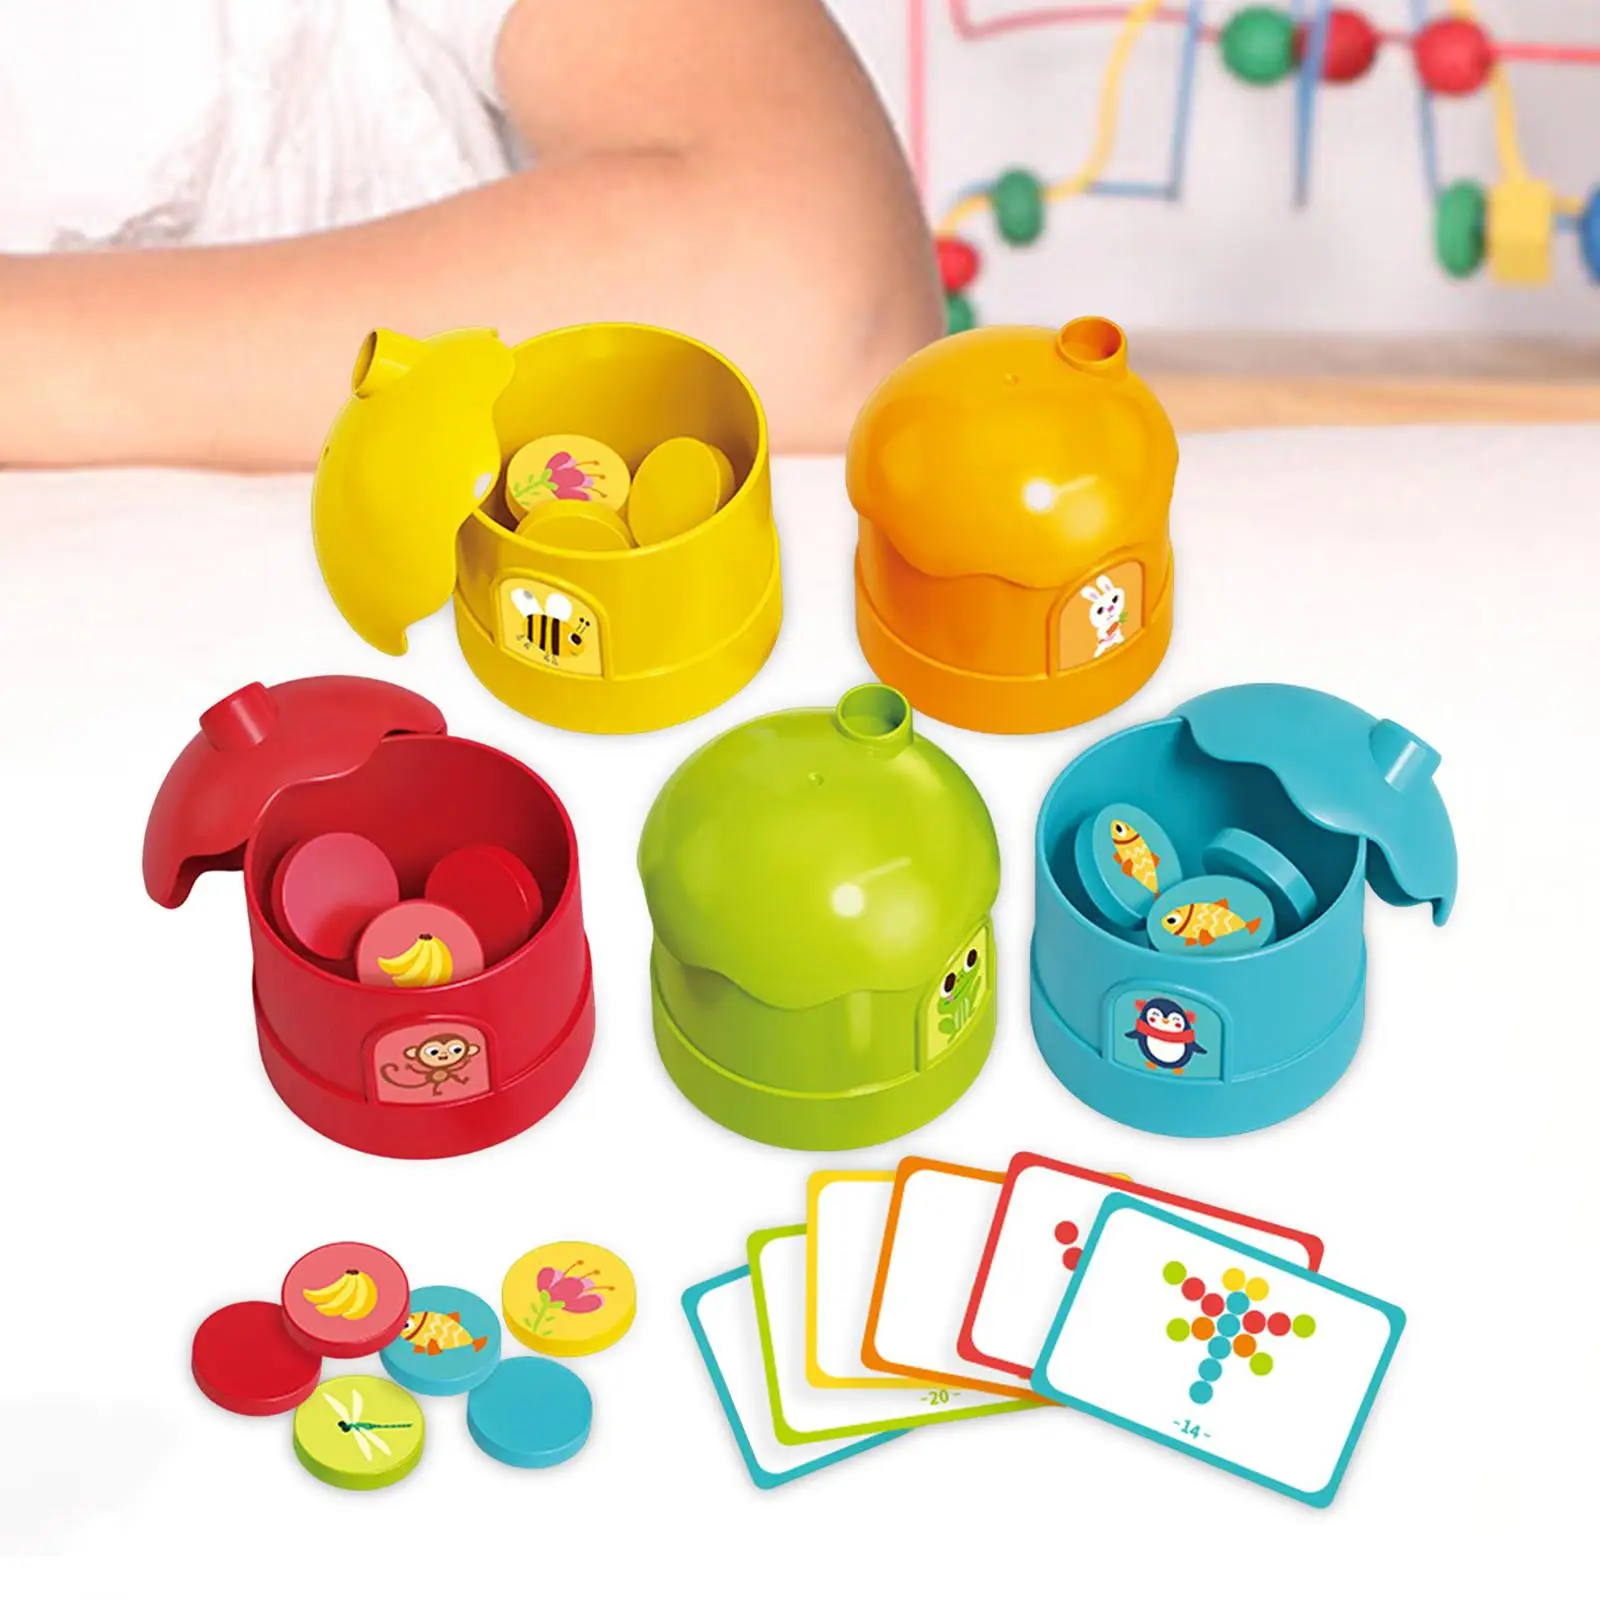 Educational Sorting Cup Classified Toys Math Teaching Aids Gift Cognitive